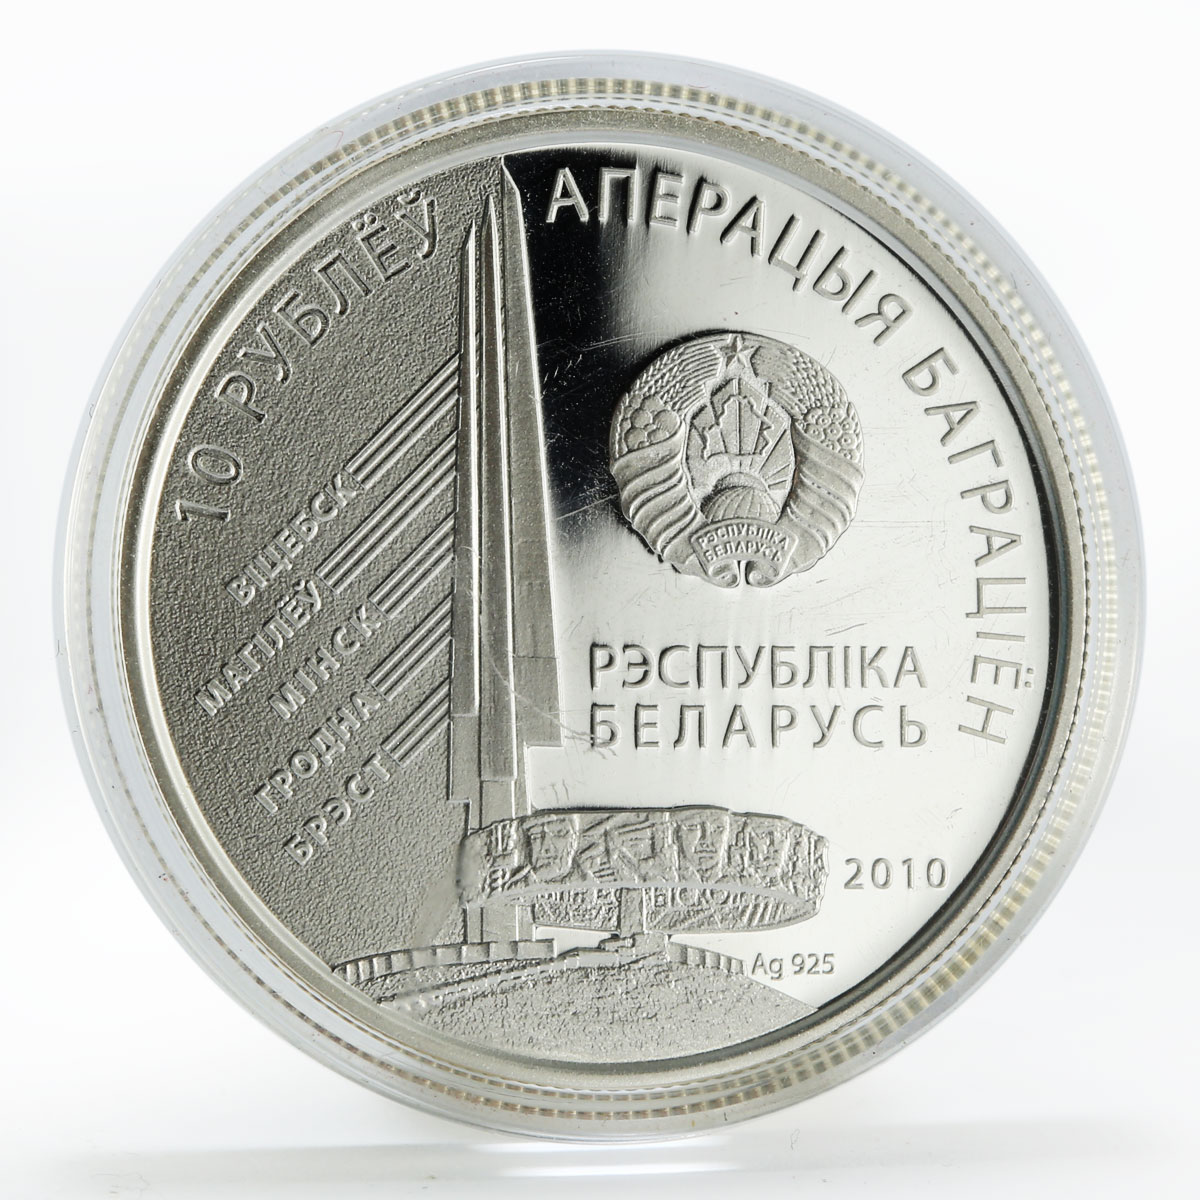 Belarus 10 rubles Operation Bagration I.D. Charnyakhousky silver coin 2010